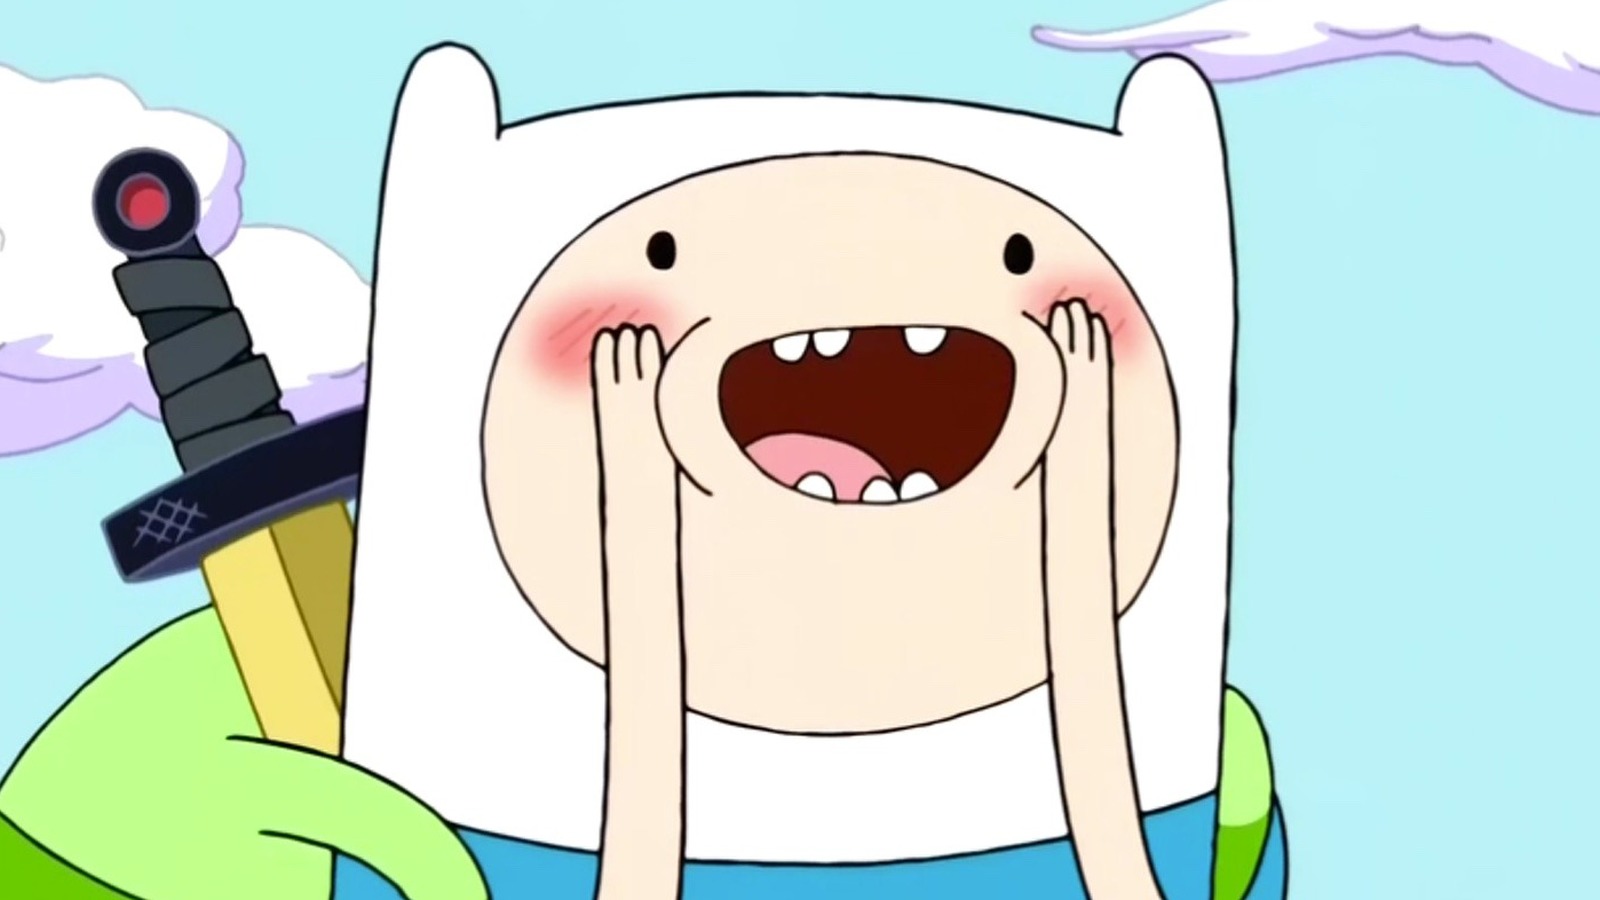 Things You Never Noticed In The First Adventure Time Episode